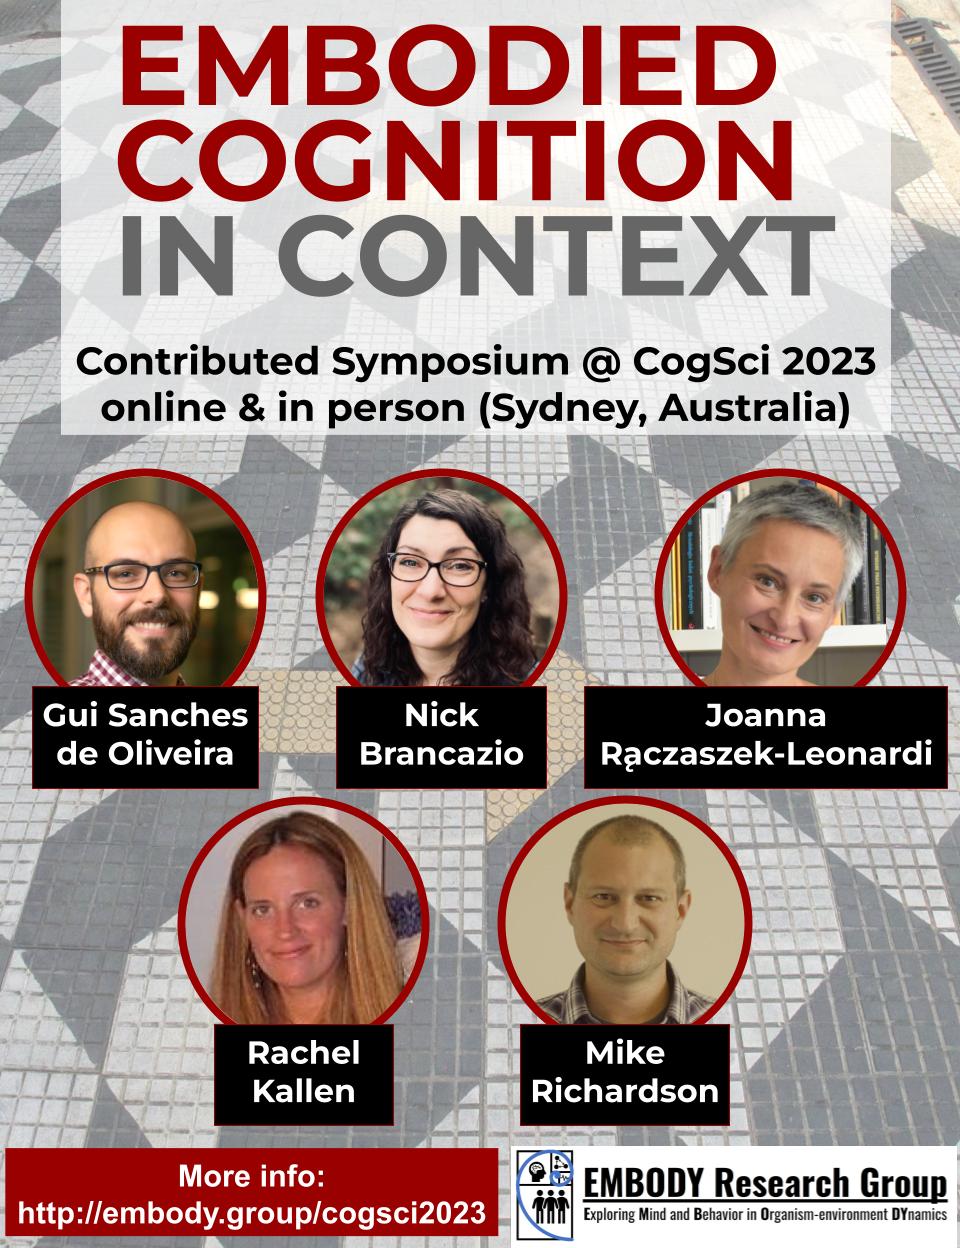 CogSci 2023 Symposium: Embodied Cognition in Context